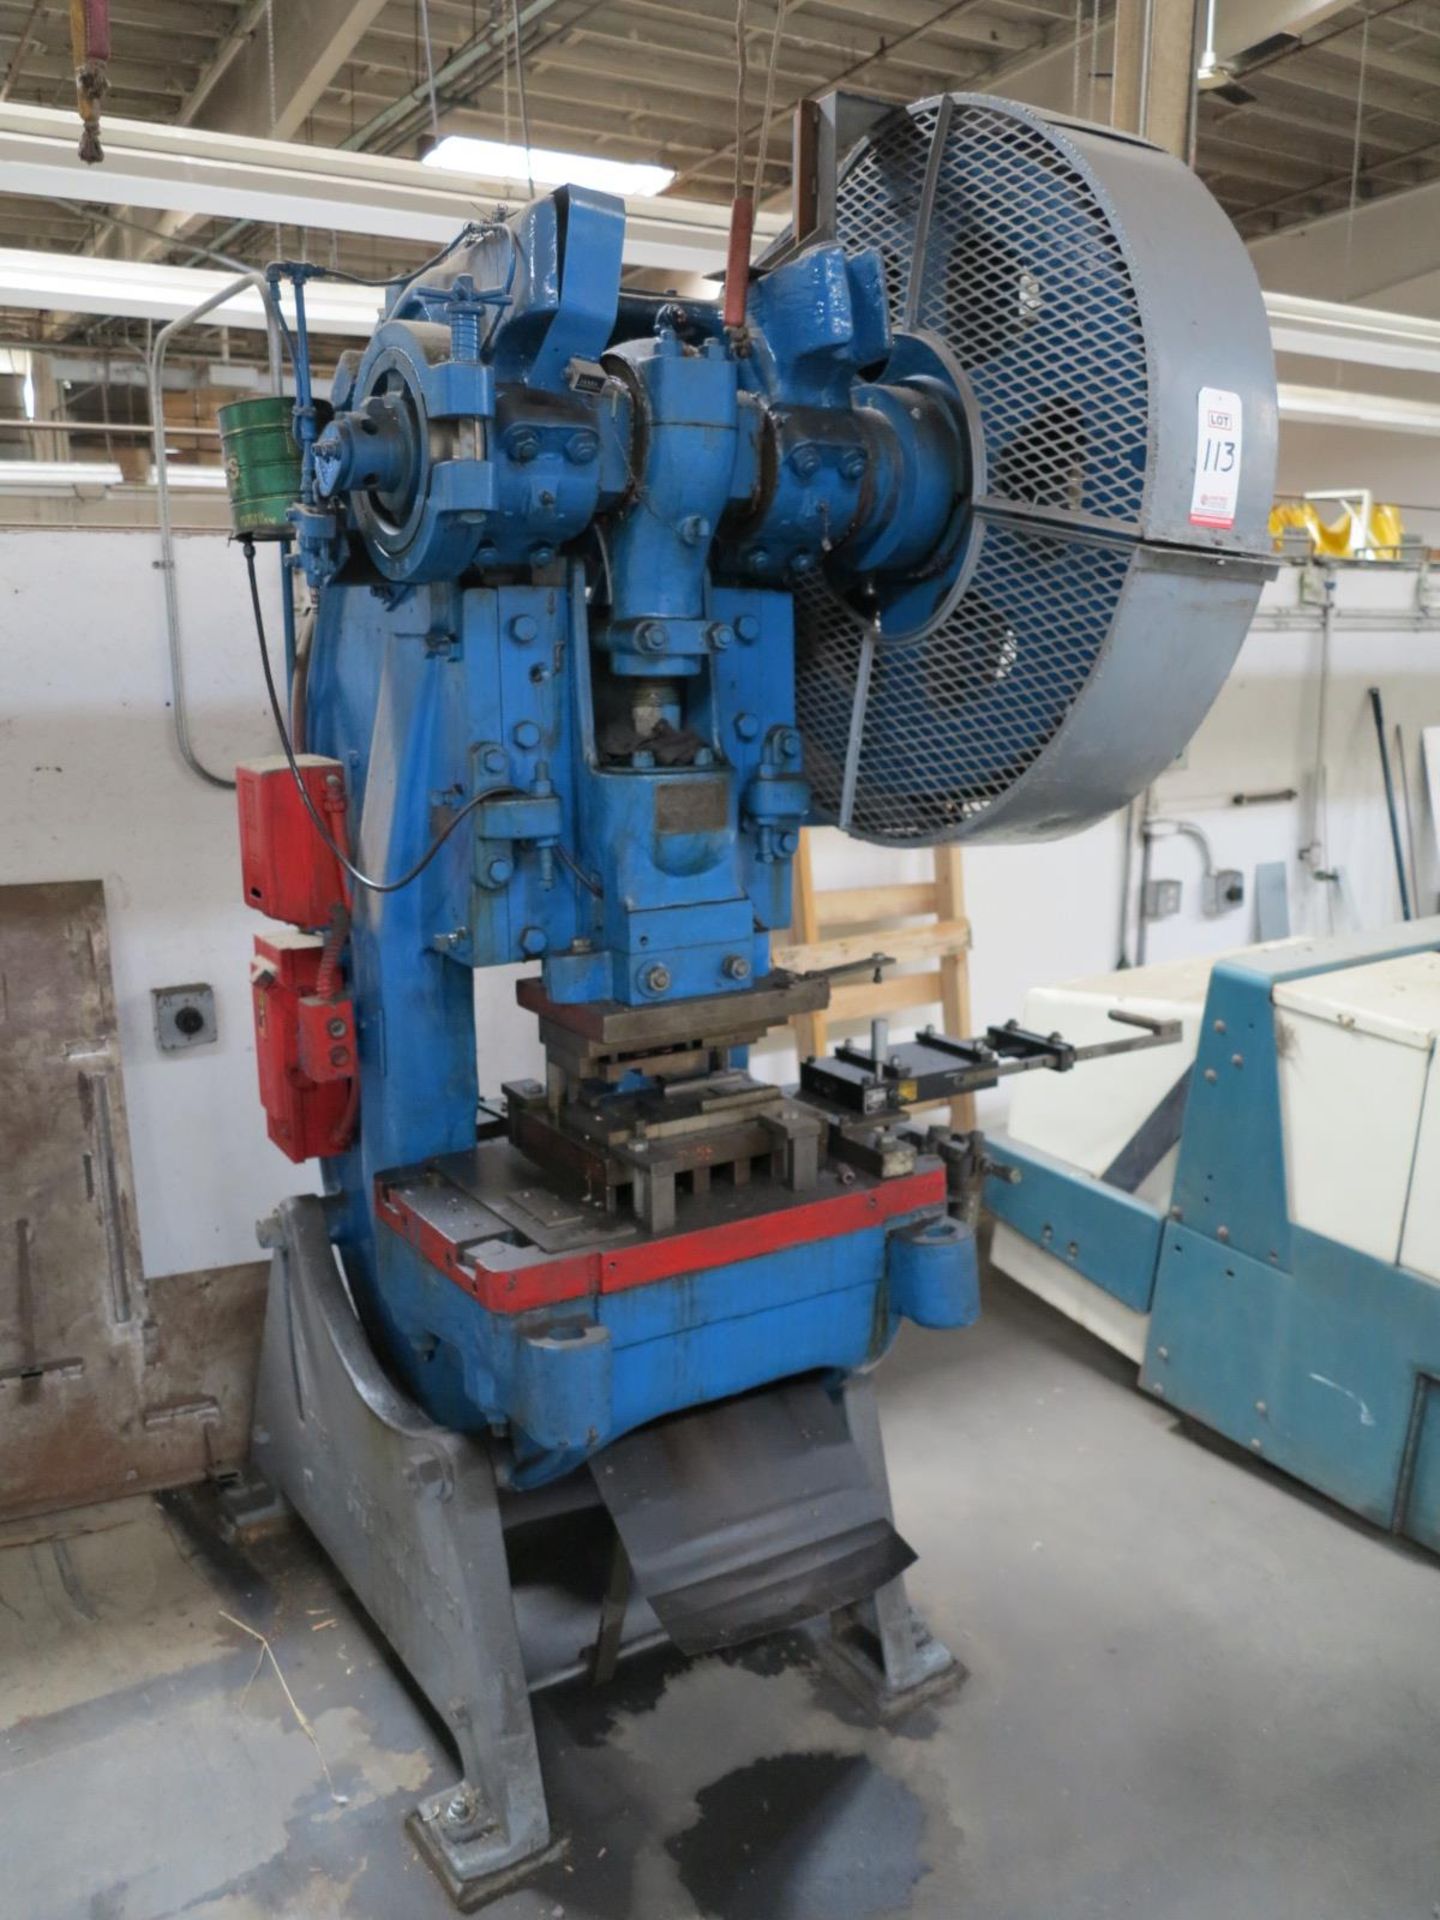 MINSTER 45-TON PUNCH PRESS, S/N 5-1004 - Image 2 of 2